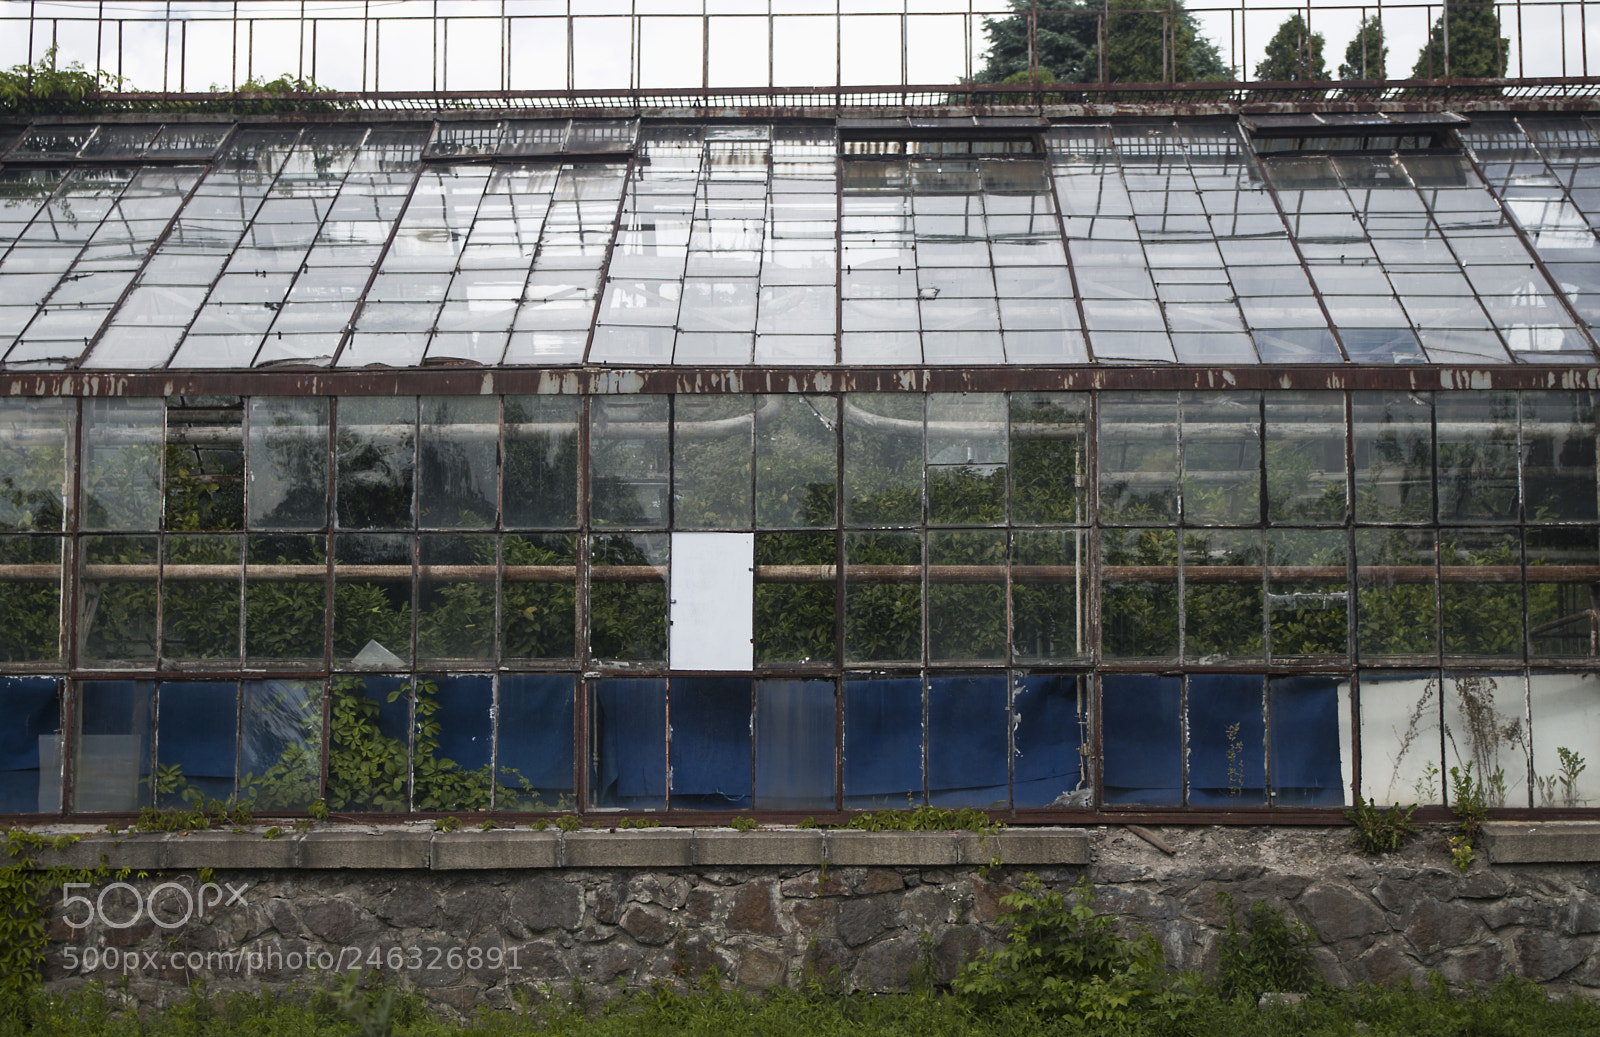 Pentax K-30 sample photo. Old greenhouse photography